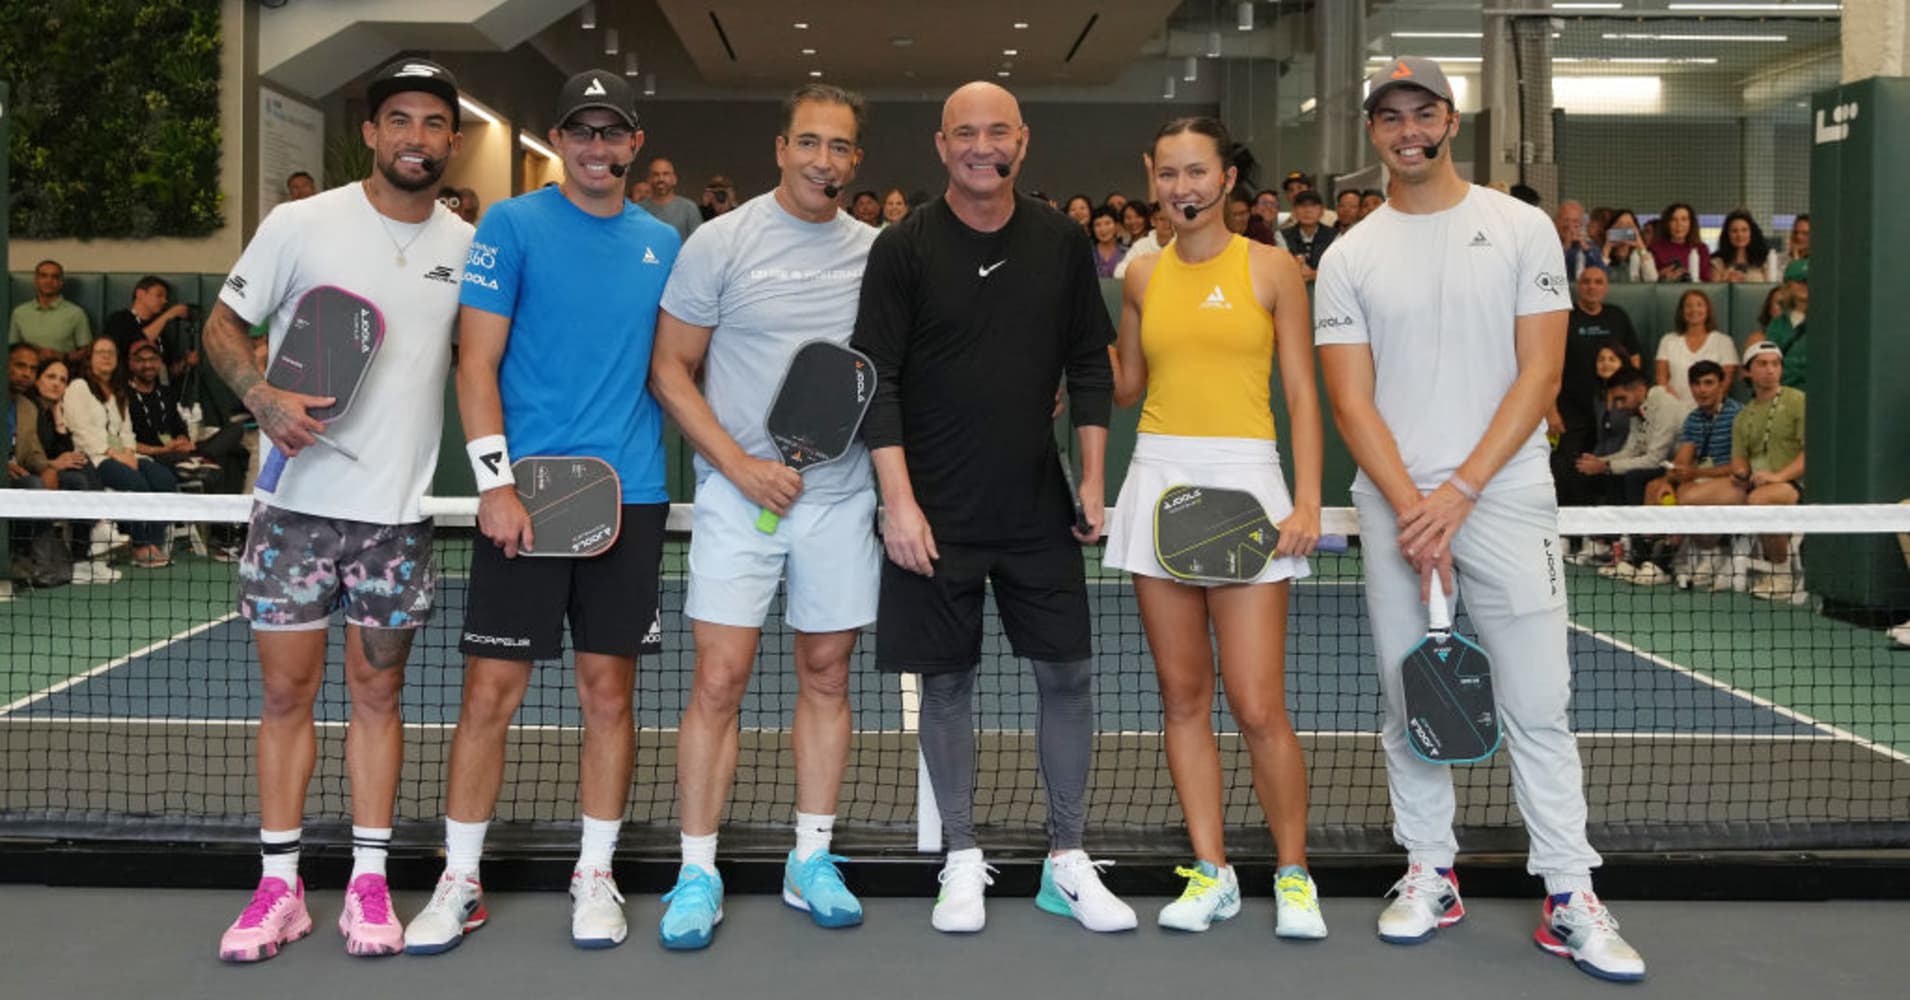 life time fitness leans into pickleball with lululemon partnership, new courts and more